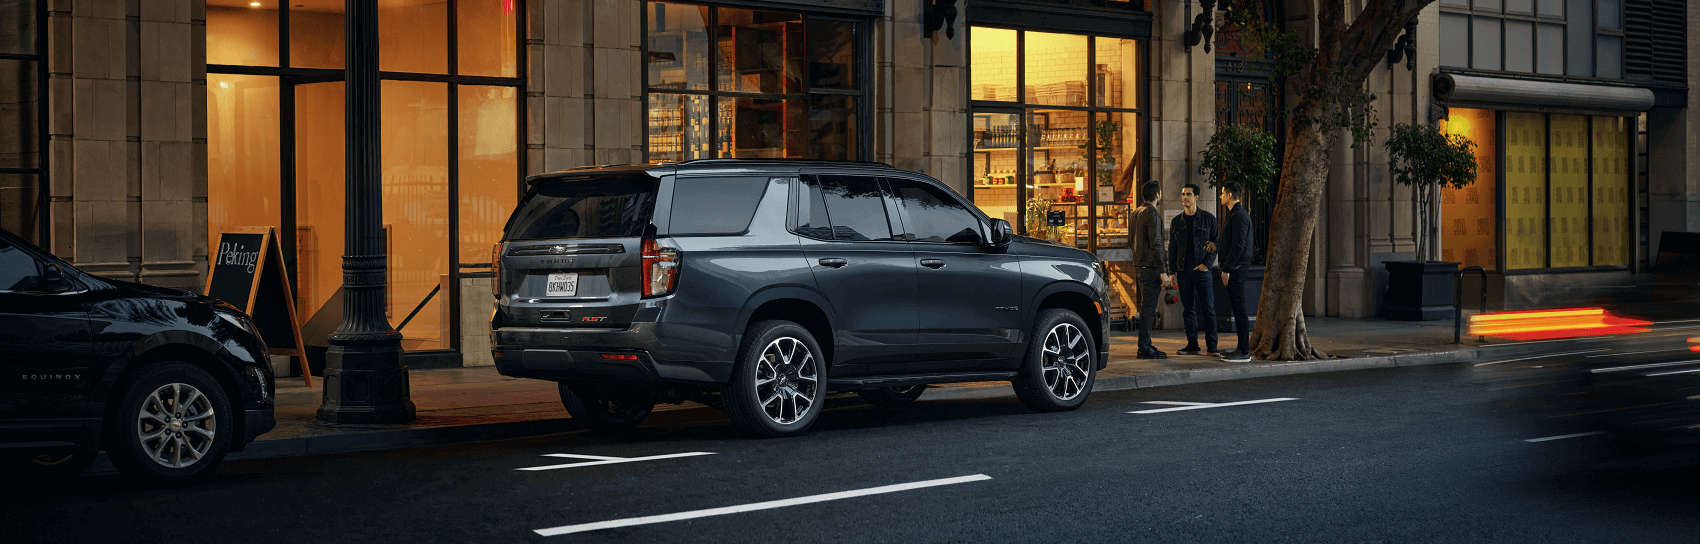 Chevy Tahoe Reviews Avon OH